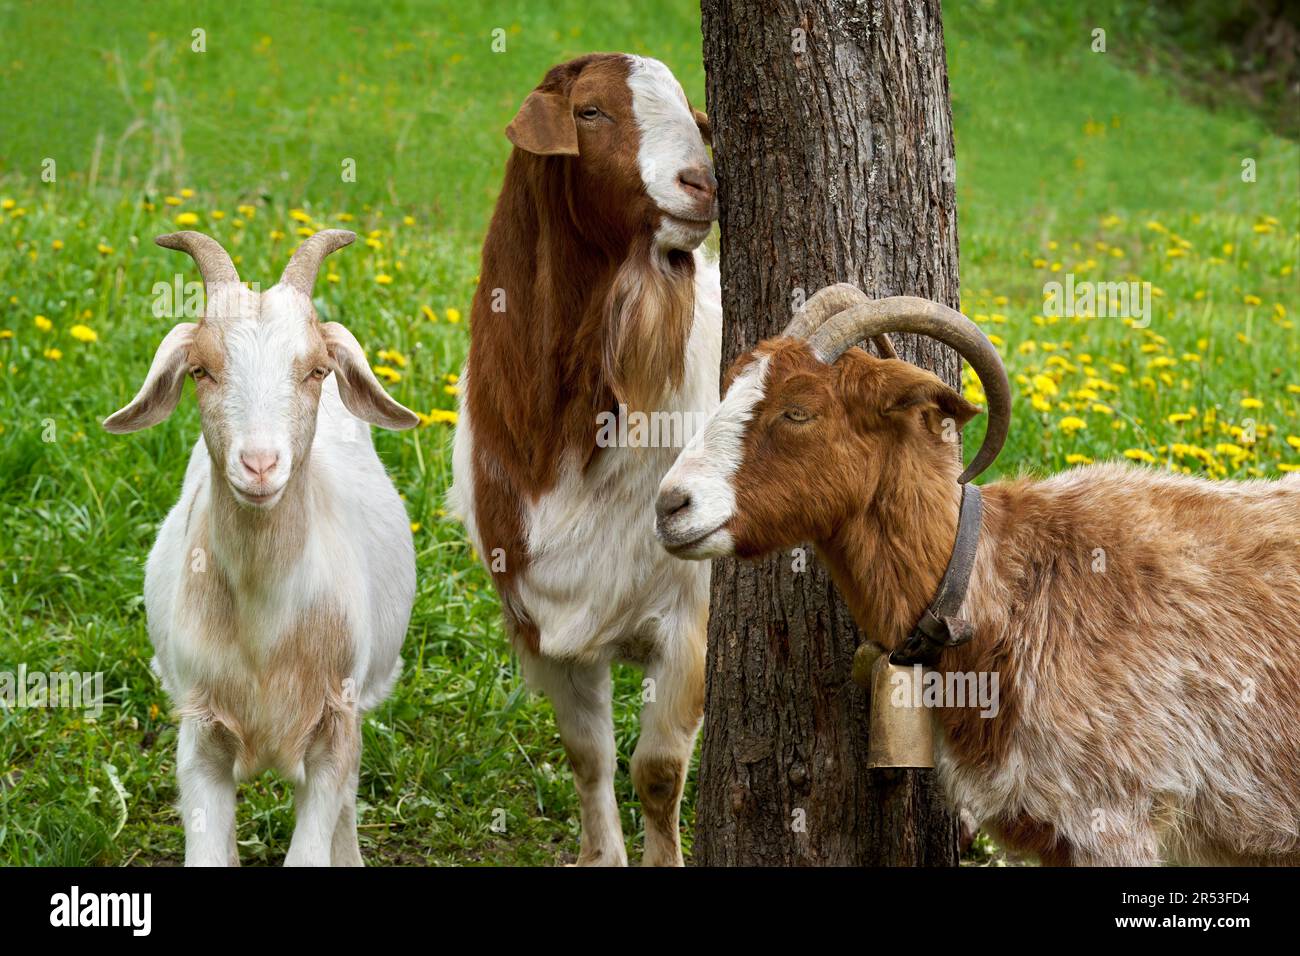 Three goats in close-up at a tree trunk in a meadow Stock Photo